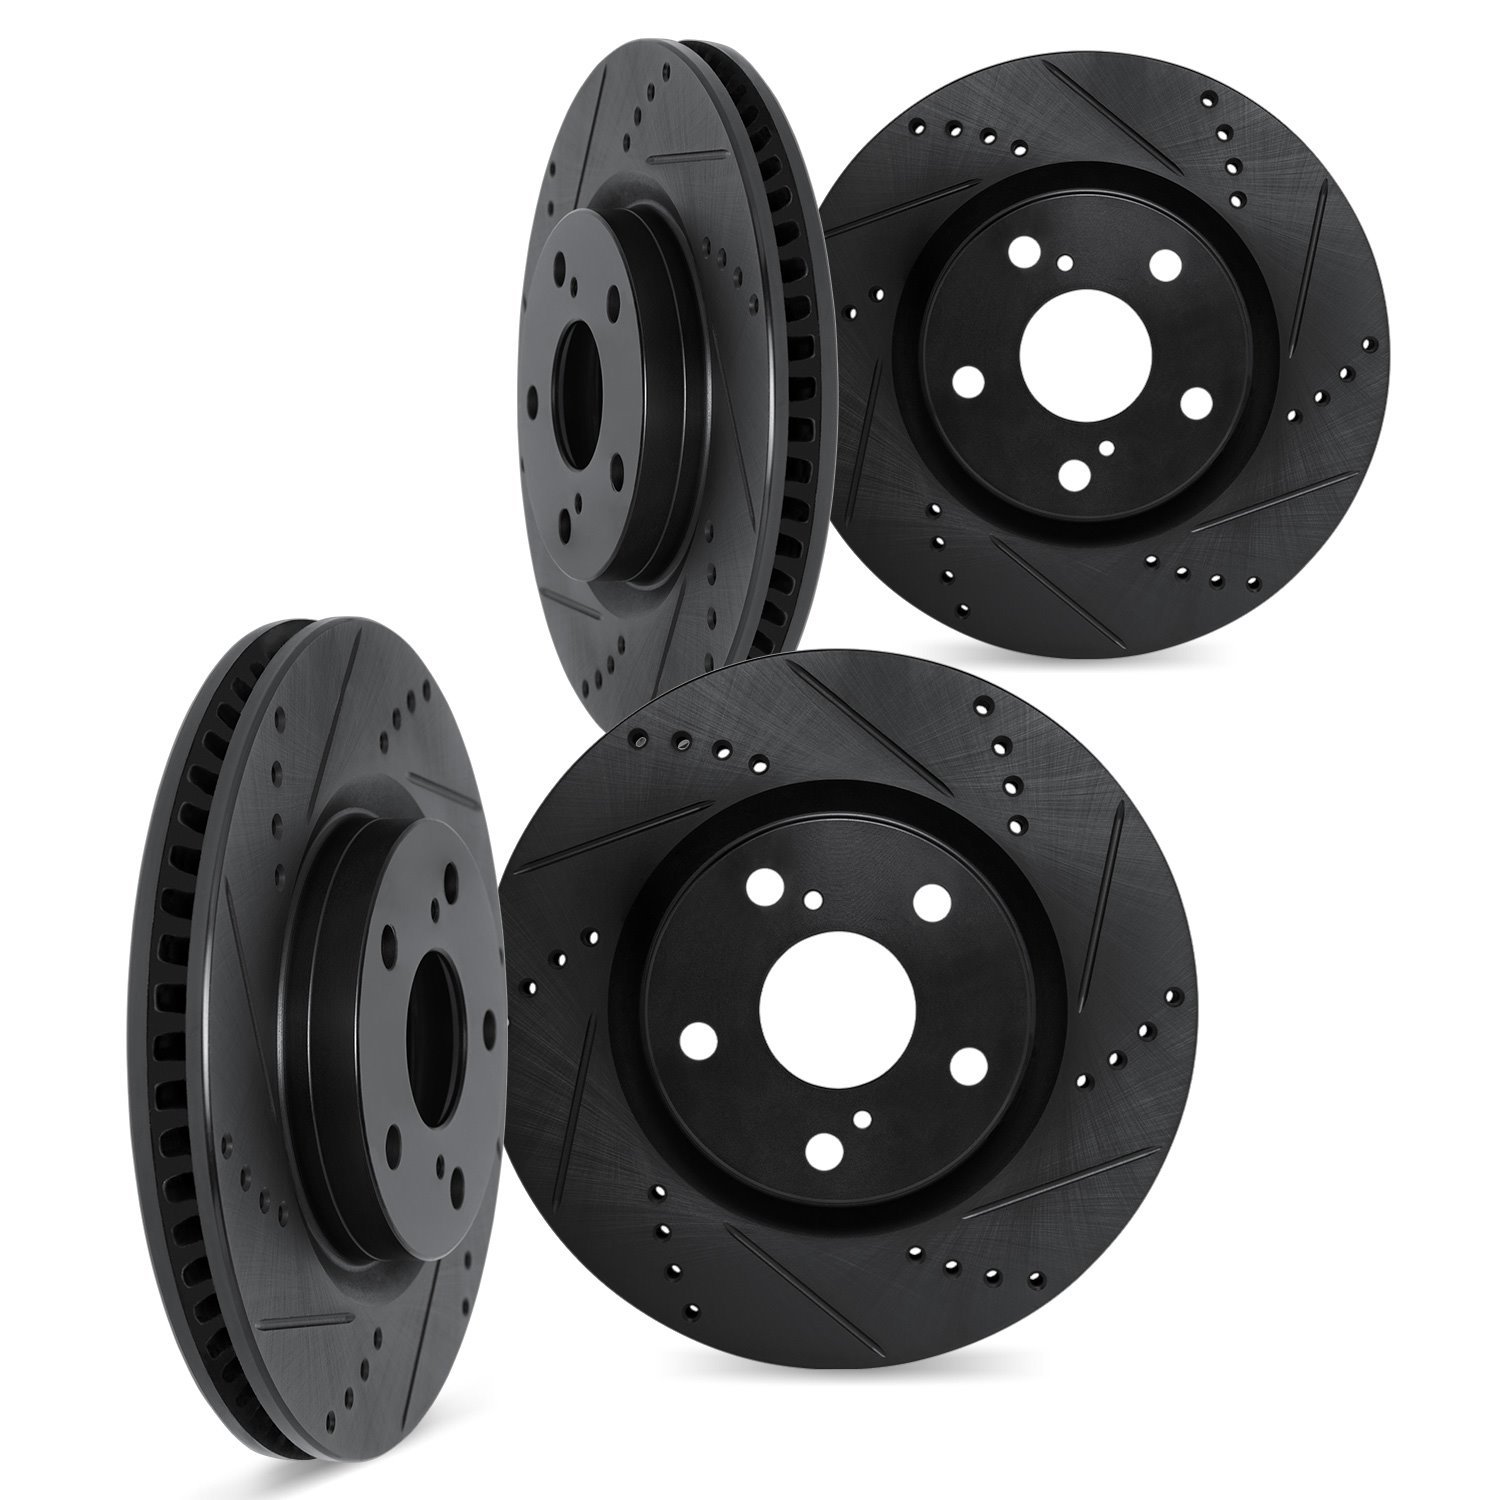 8004-54280 Drilled/Slotted Brake Rotors [Black], Fits Select Ford/Lincoln/Mercury/Mazda, Position: Front and Rear